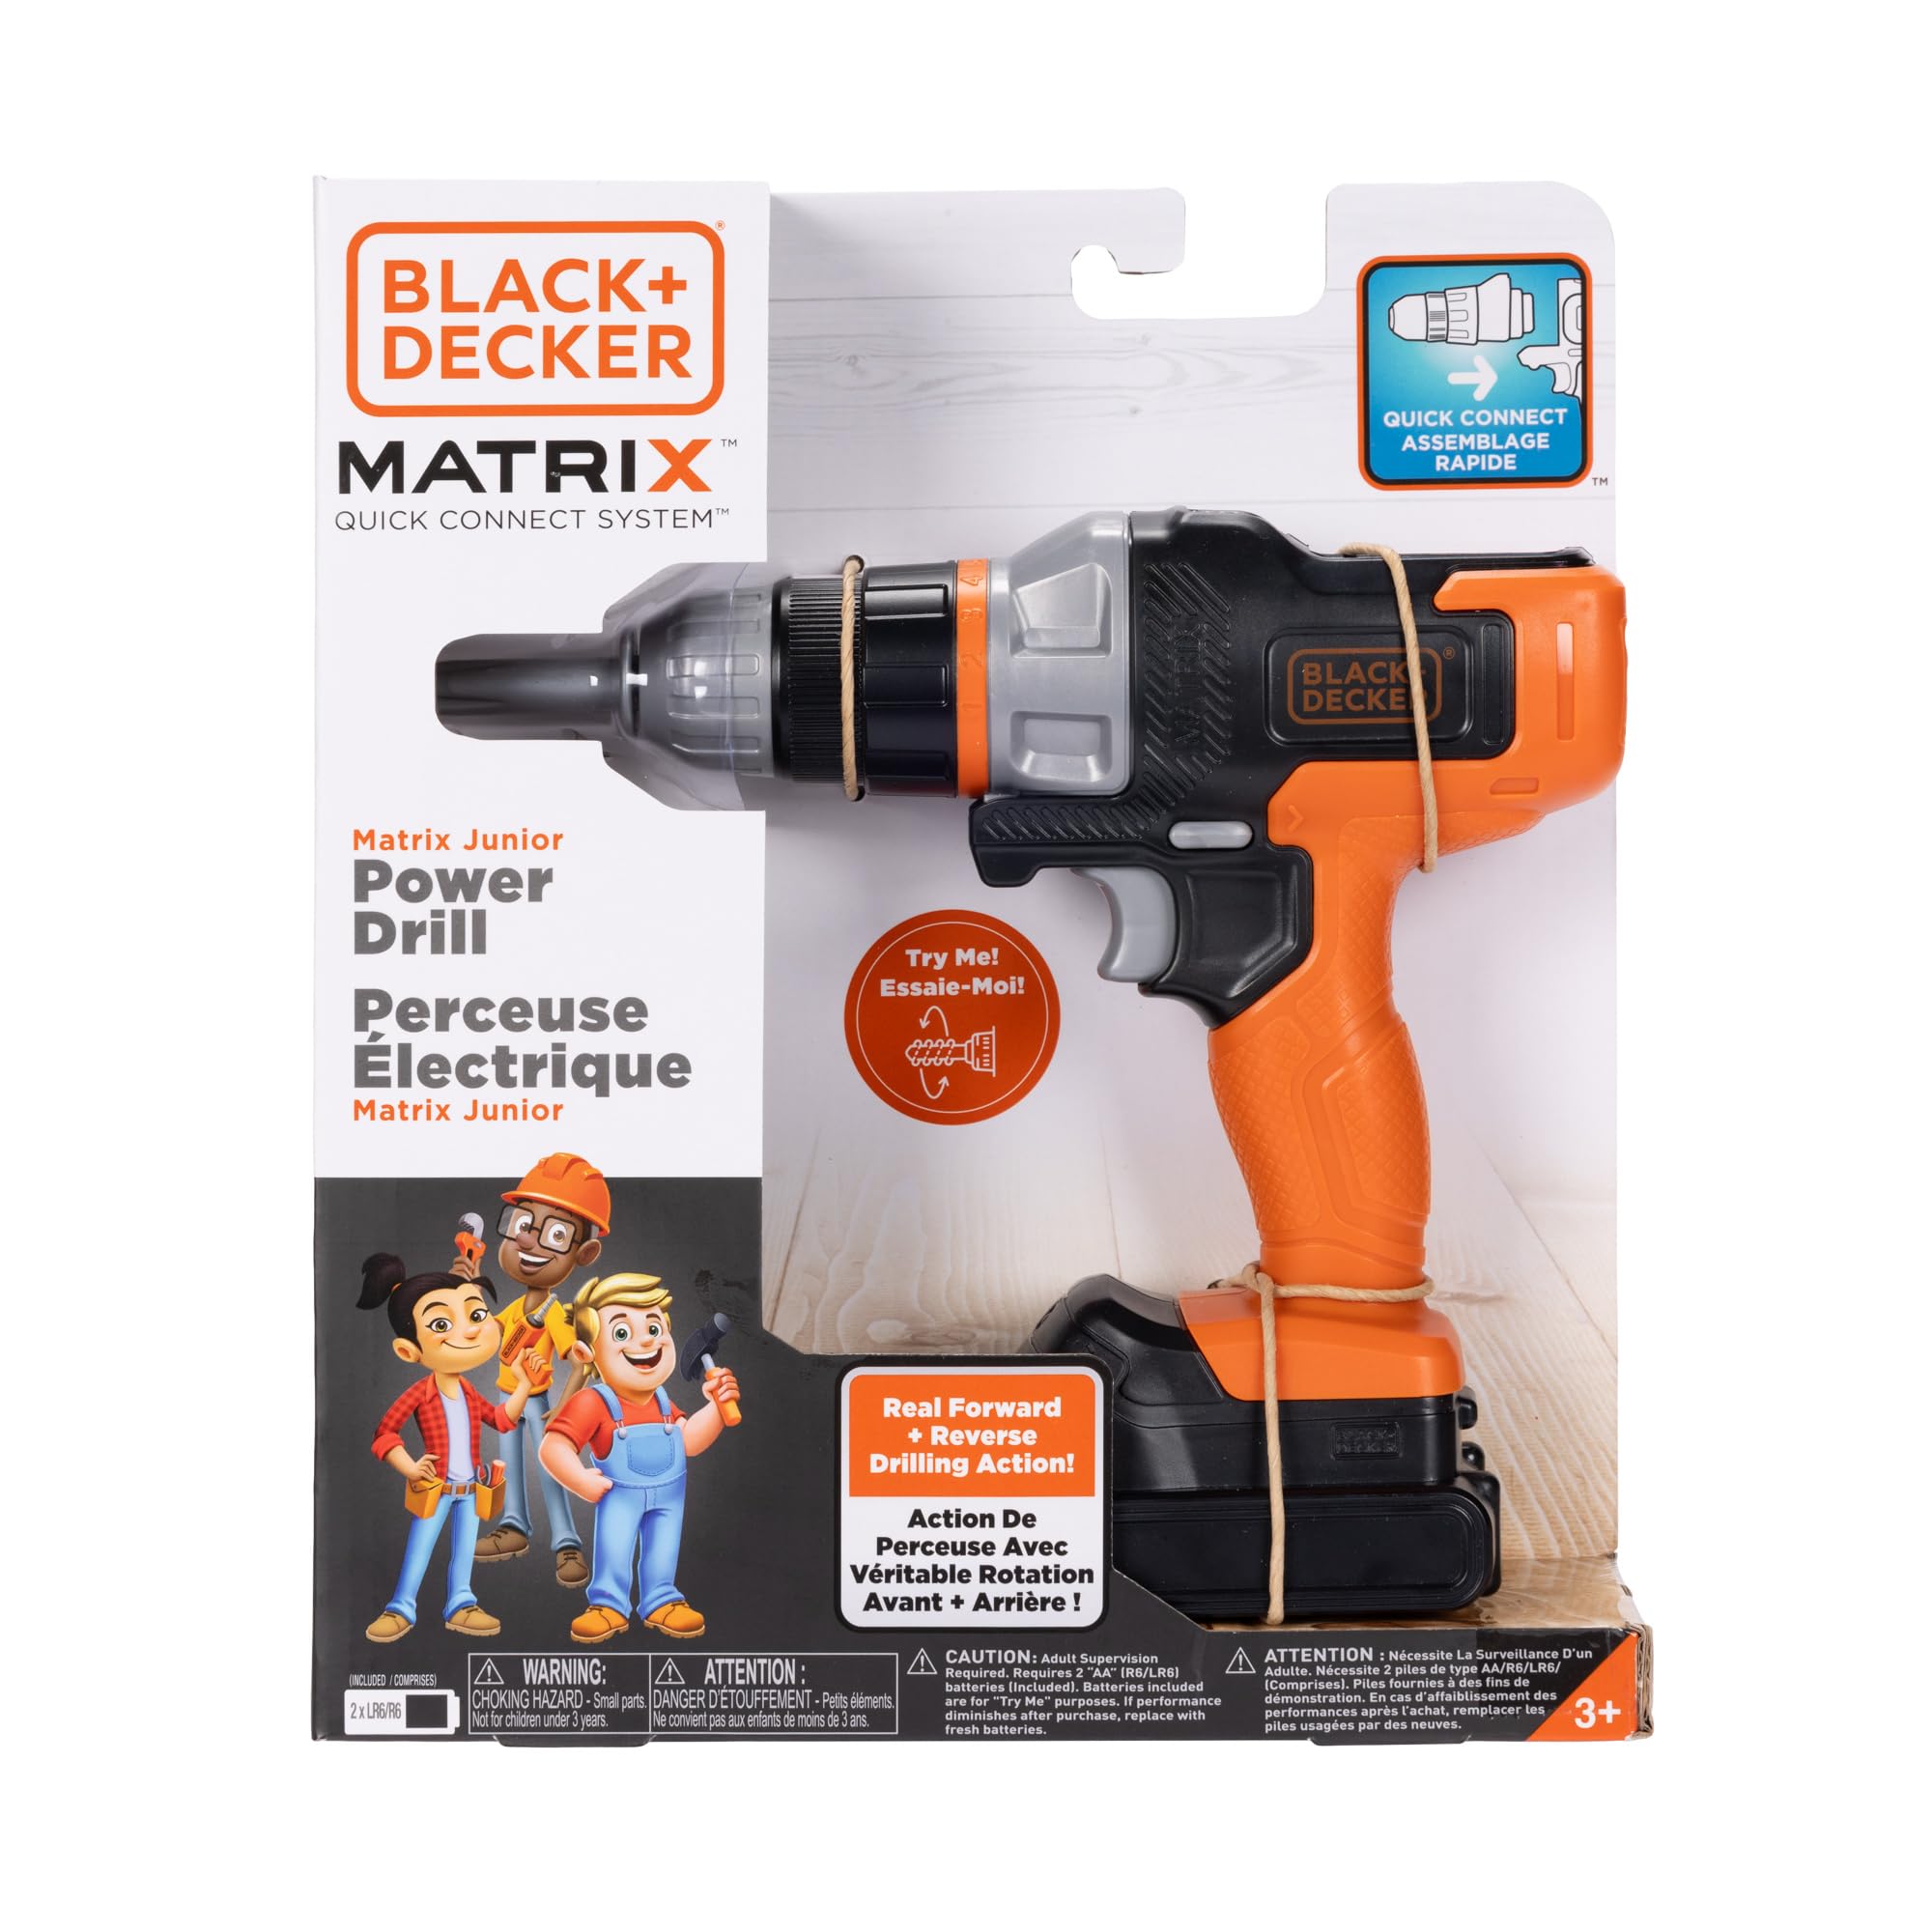 BLACK+DECKER Matrix Jr. Power Drill Kids Tools Play Toy w/ Forward & Reverse Drilling Action $10 + Free Shipping w/ Prime or on $35+